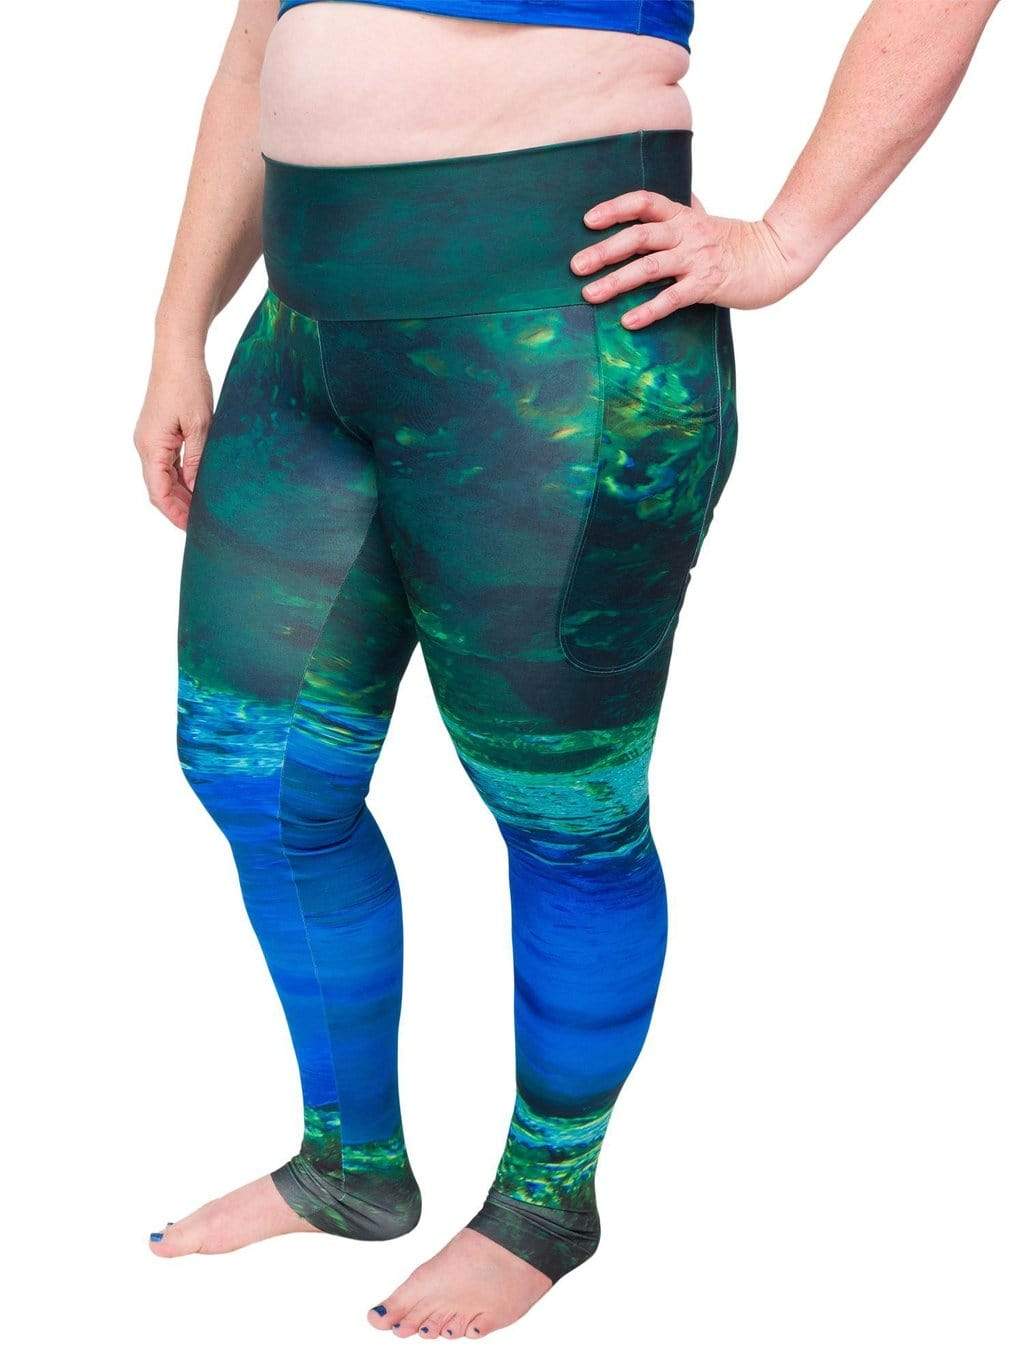 Model: Ruth volunteers for citizen science projects on both salt and freshwater fish and spends as much time as possible in, on, or under the water. She is 5'7", 217 lbs and is wearing a 2XL.